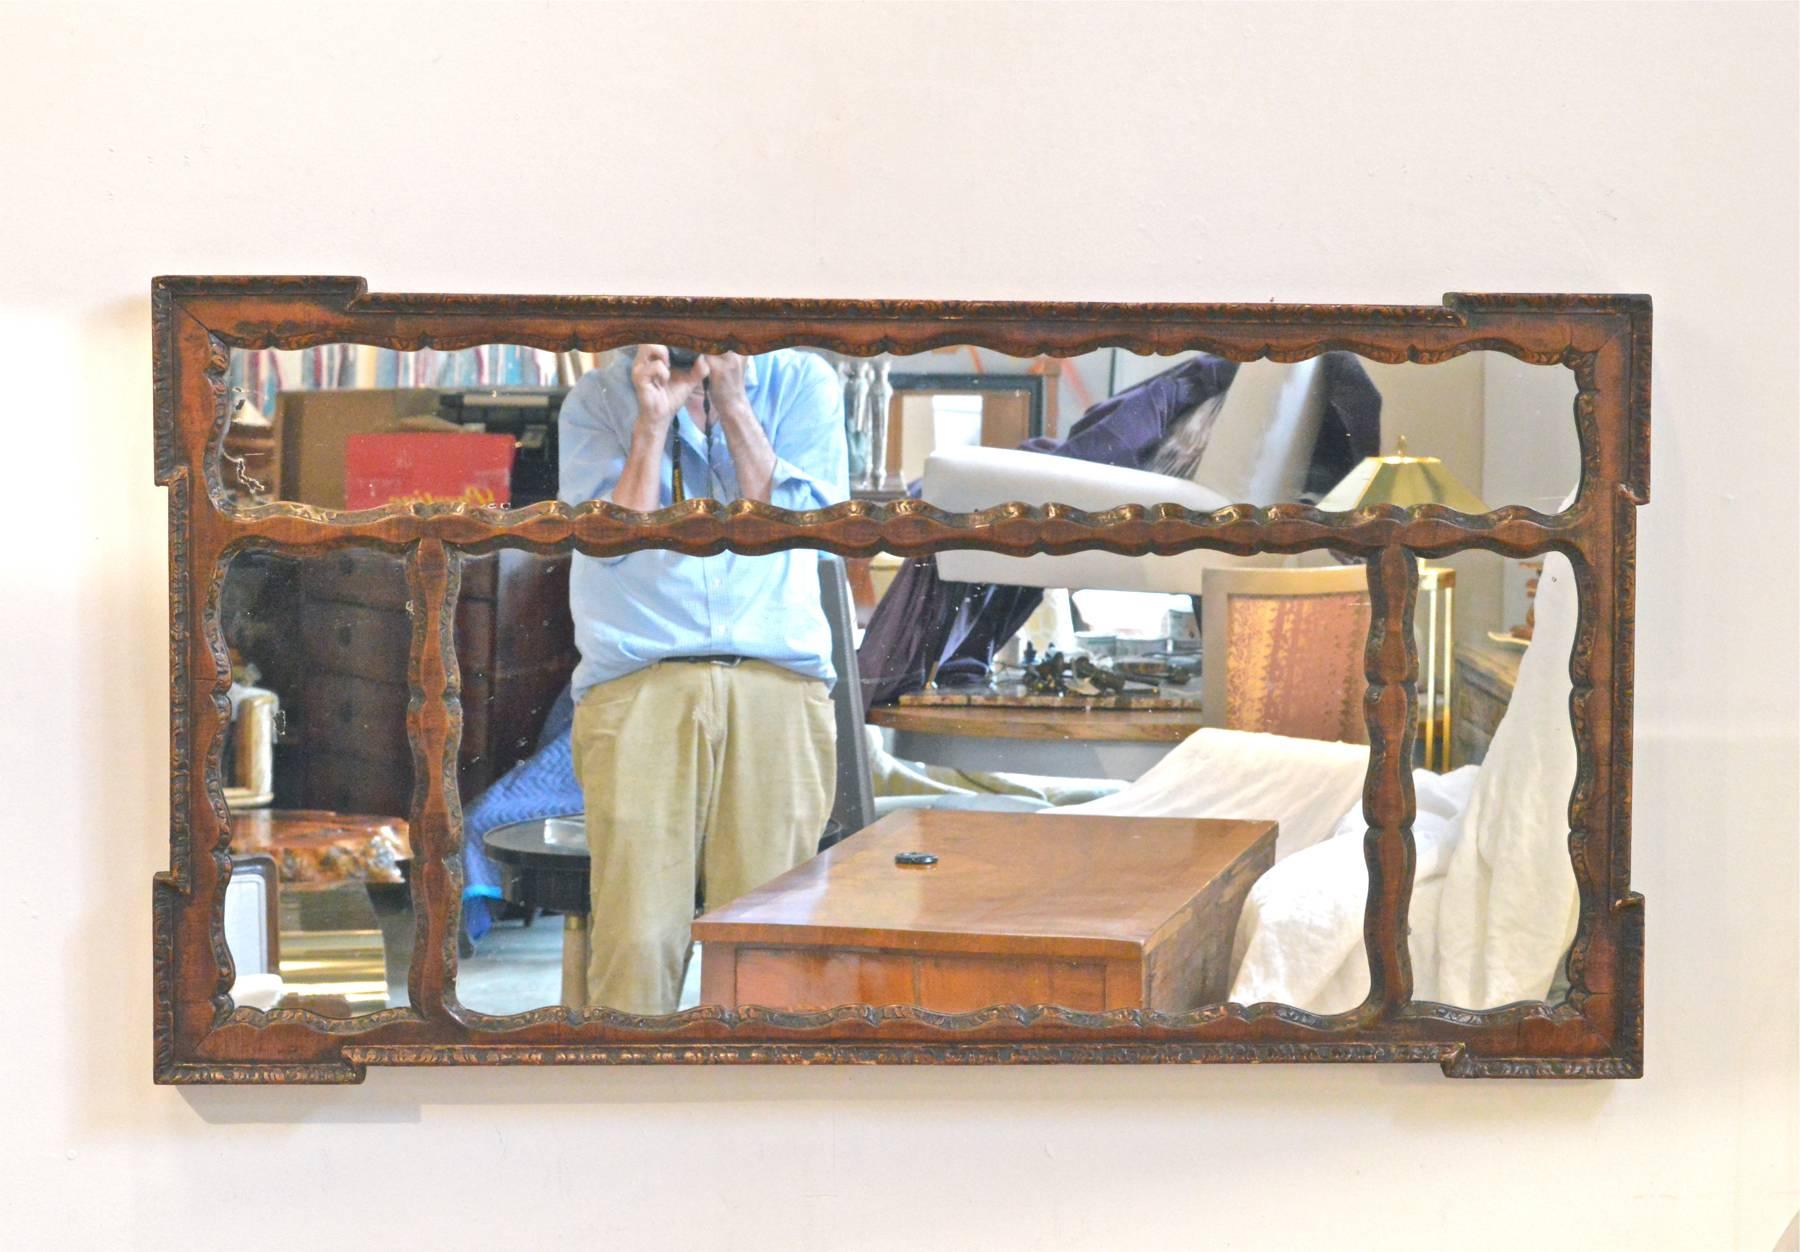 Unusual mantel mirror in the Spanish Colonial taste. The mahogany frame can be hung horizontally or vertically to your taste. Mirror has that certain rustic 